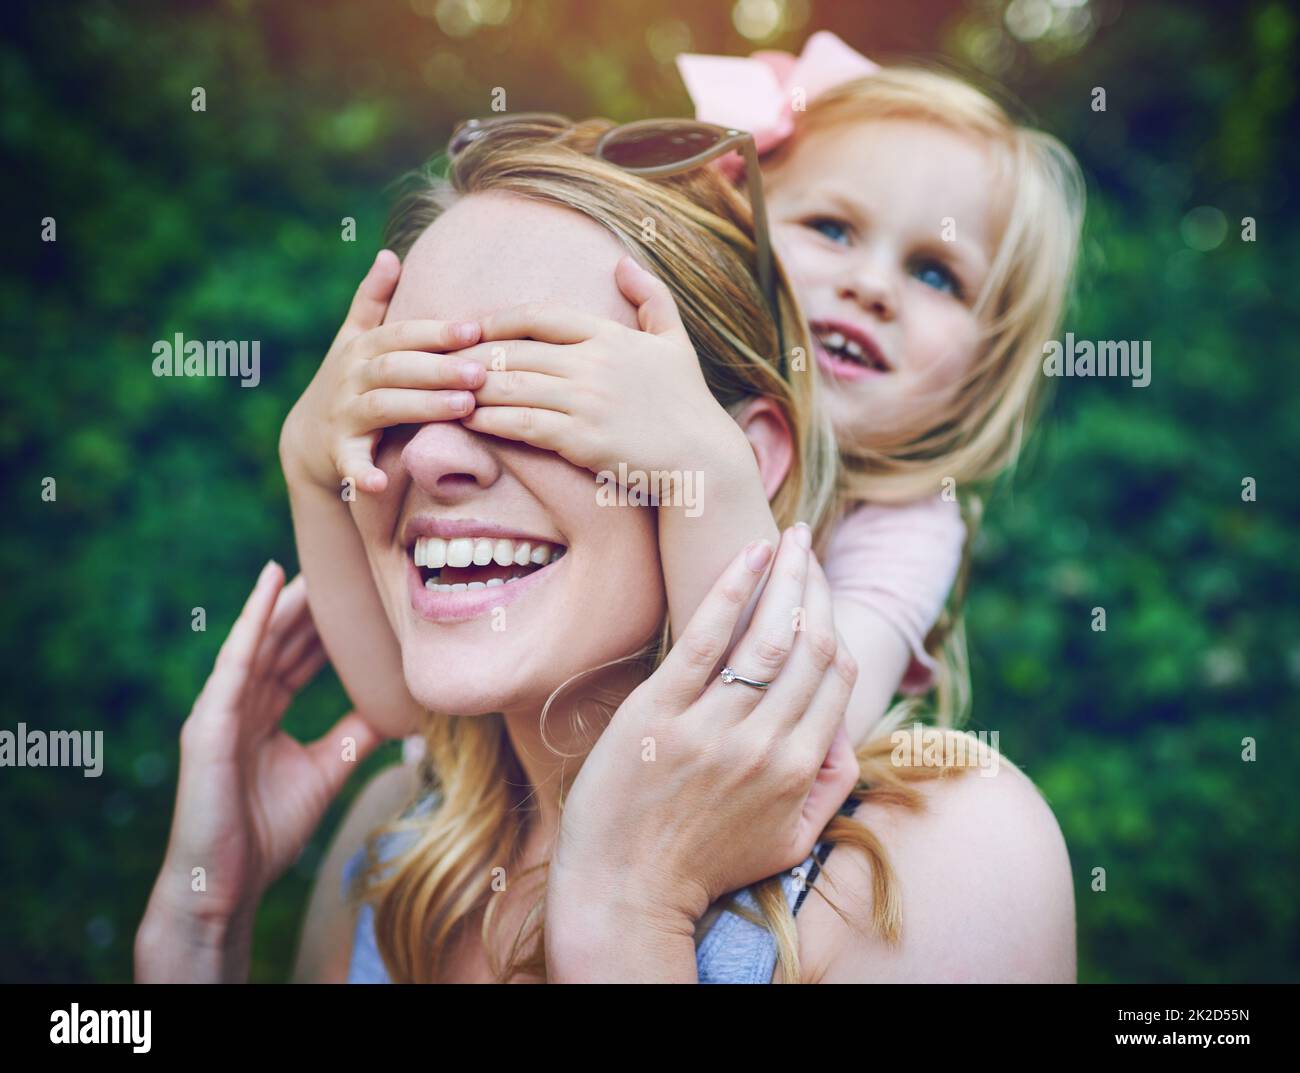 Peek a boo, guess who. Shot of an adorable little girl playfully covering her mothers eyes outdoors. Stock Photo